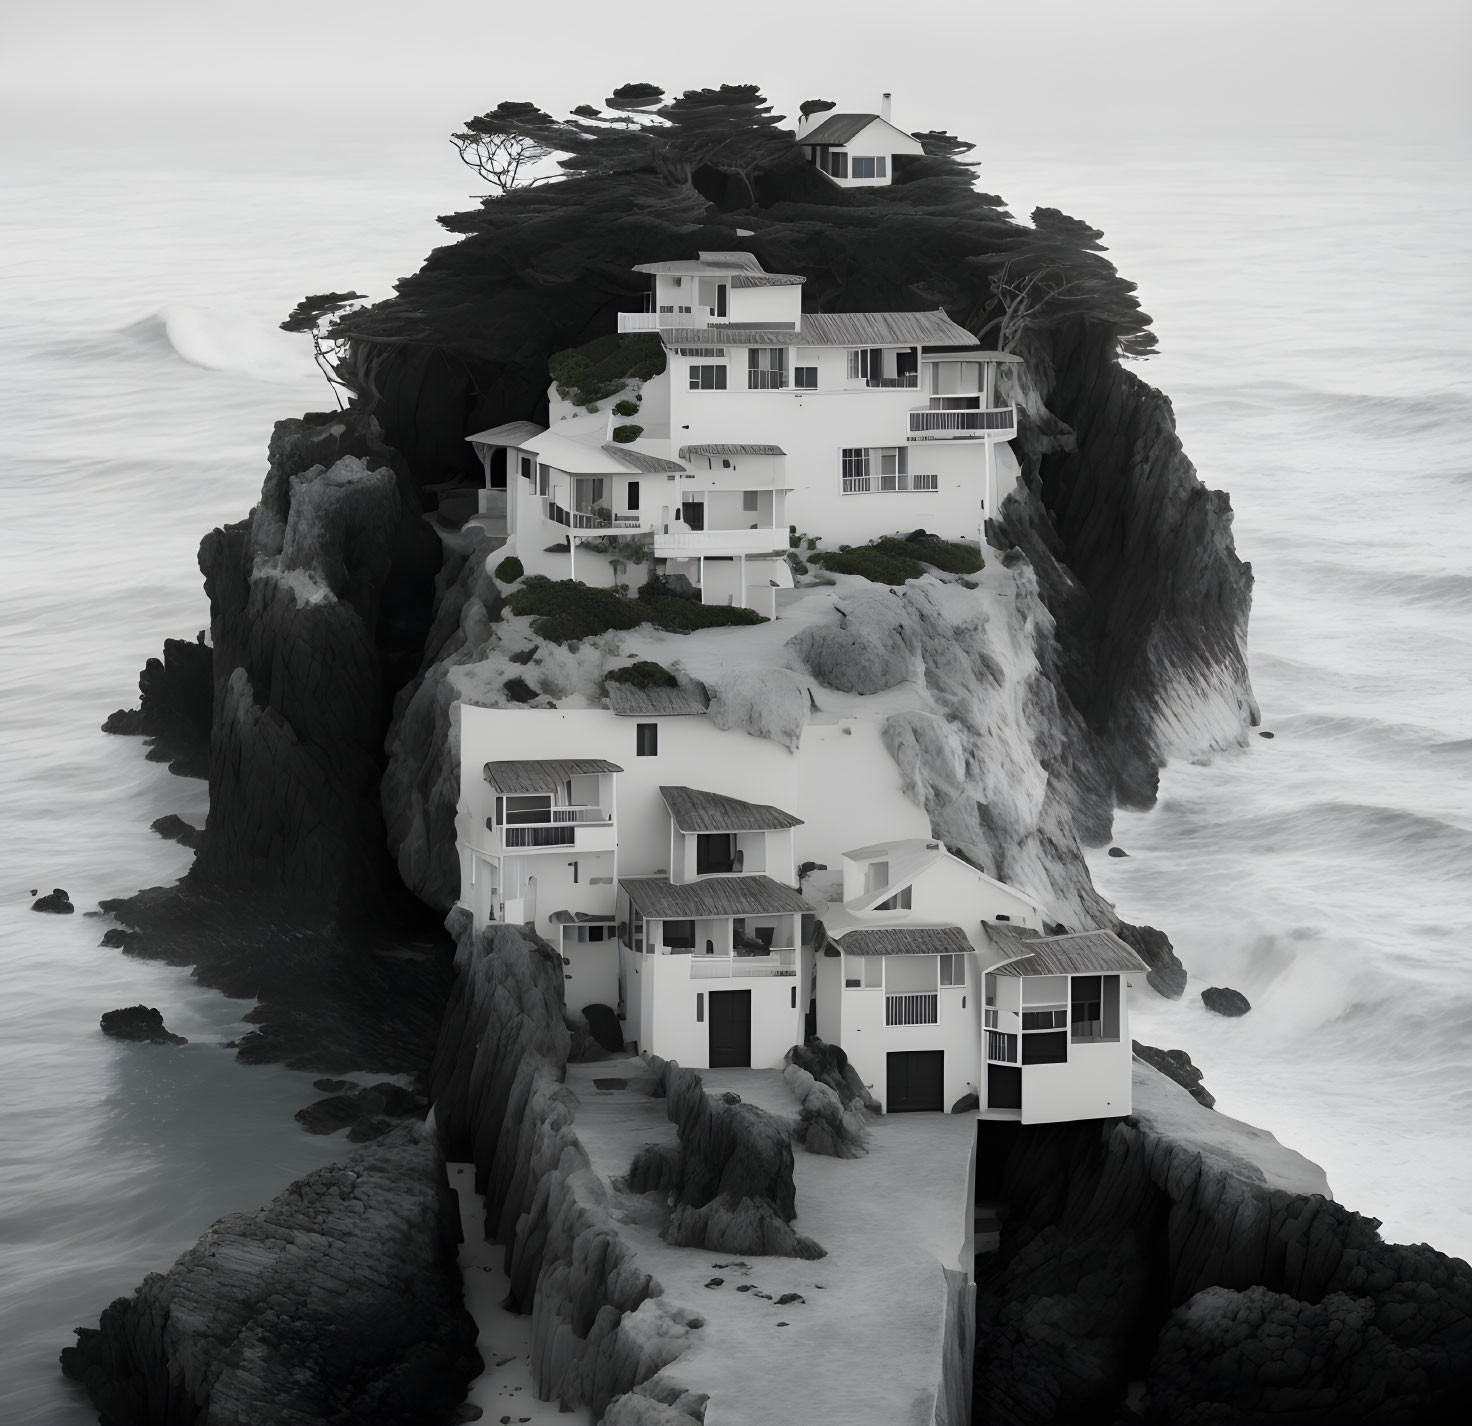 White modernistic buildings on rugged cliff overlooking misty ocean.